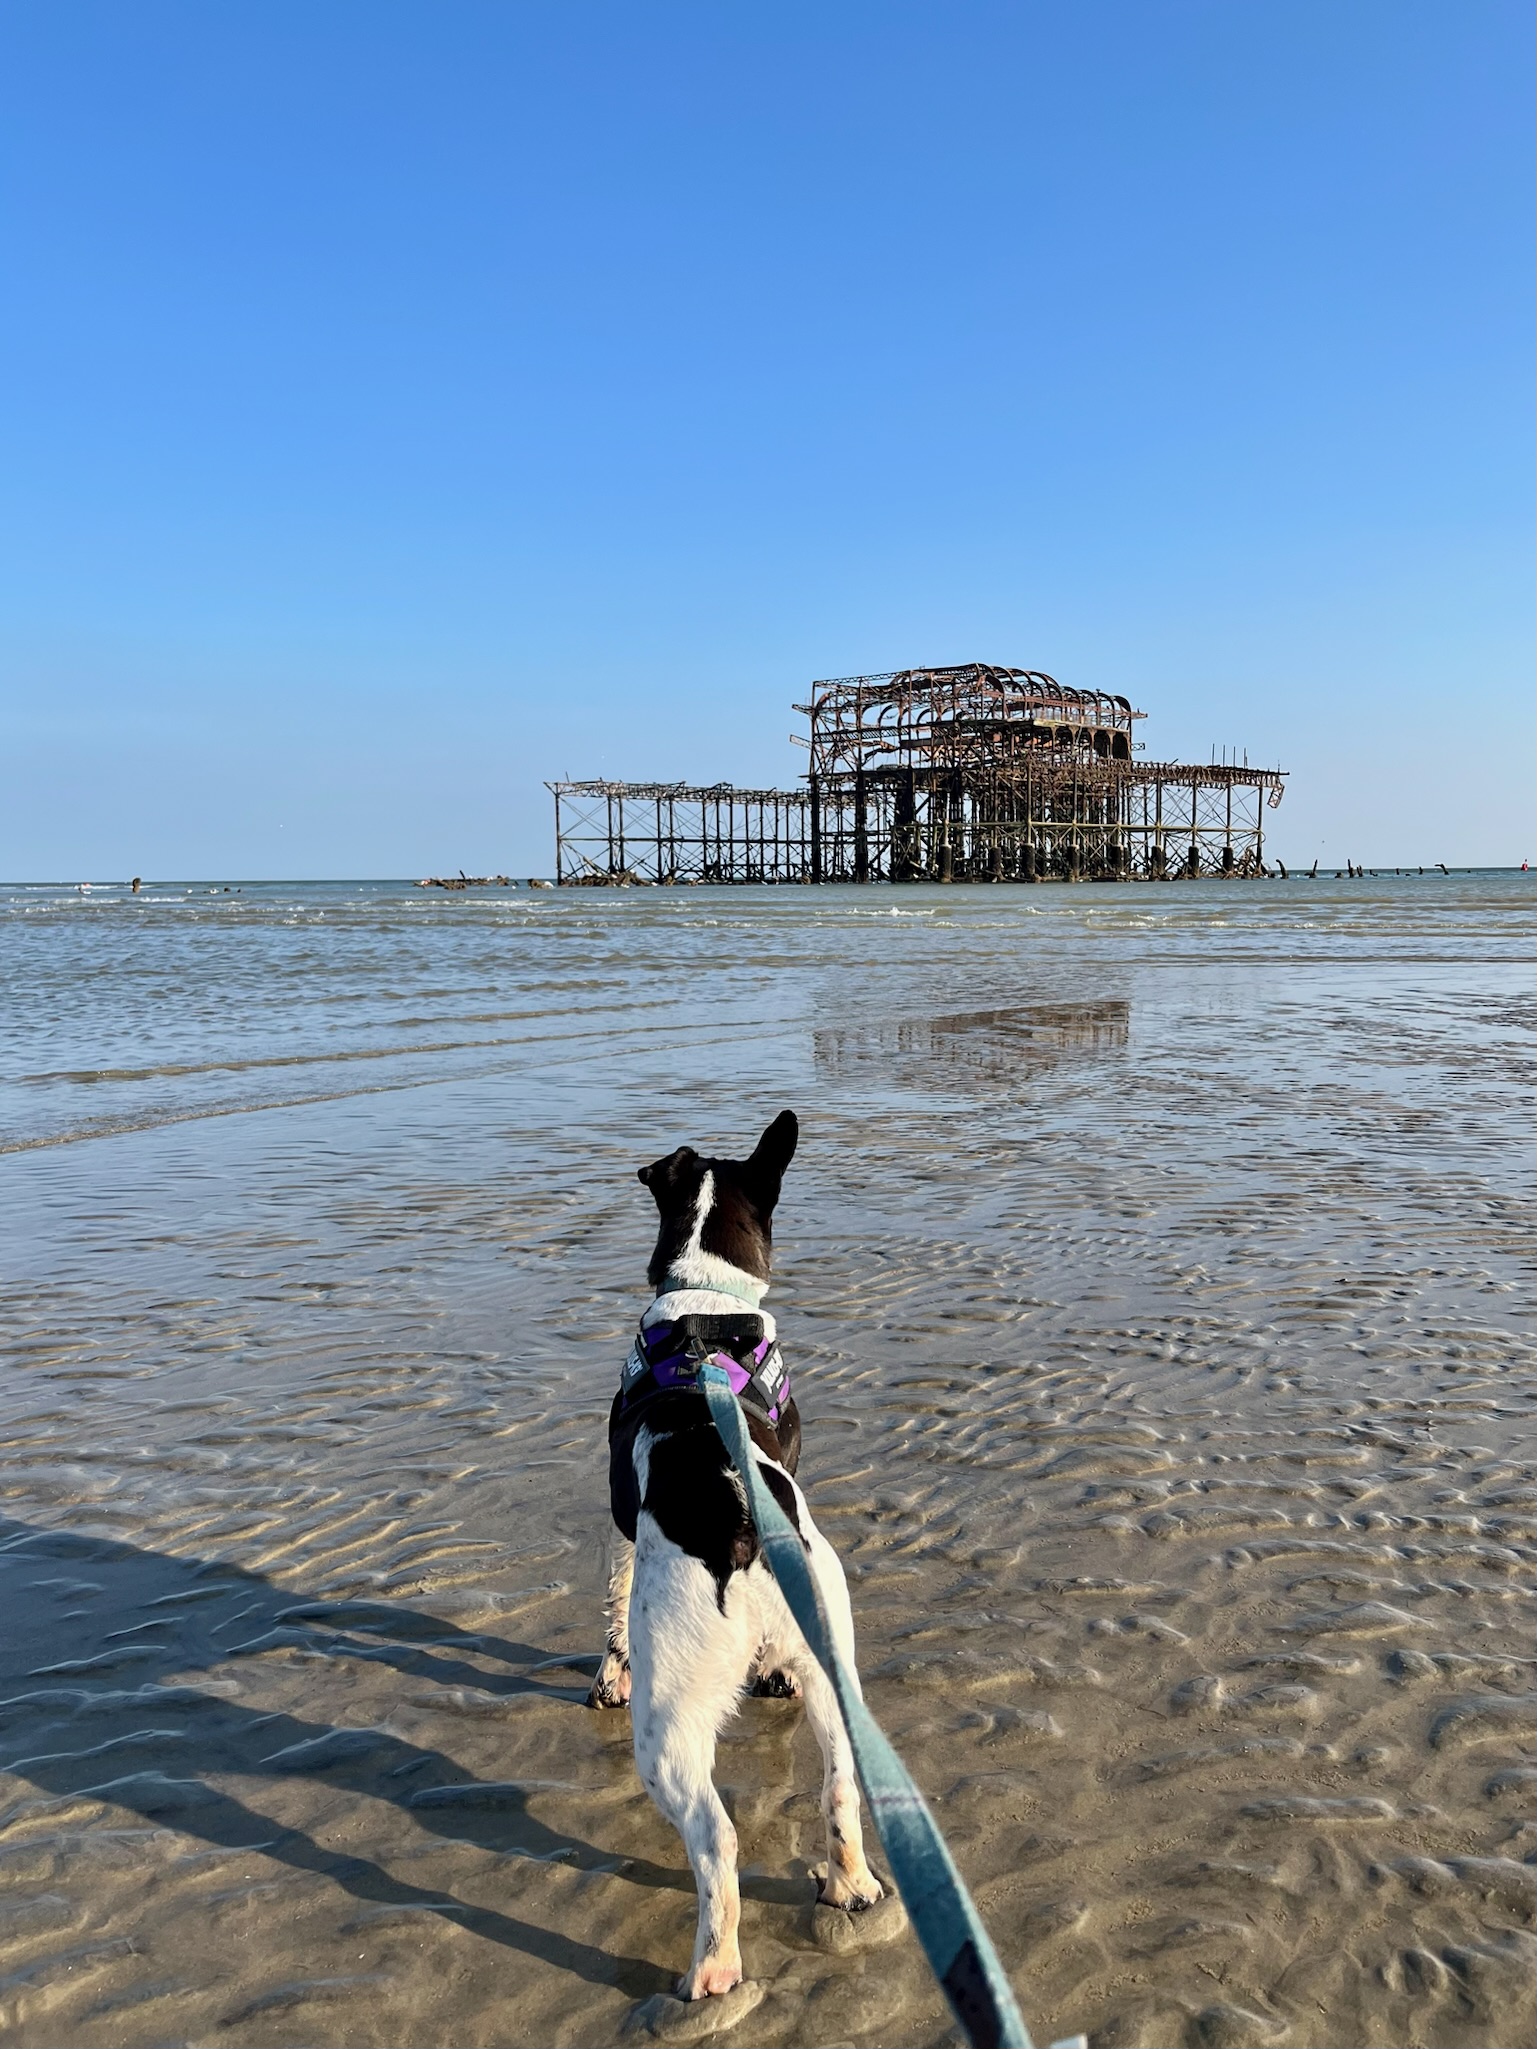 On the beach looking at the West Pier